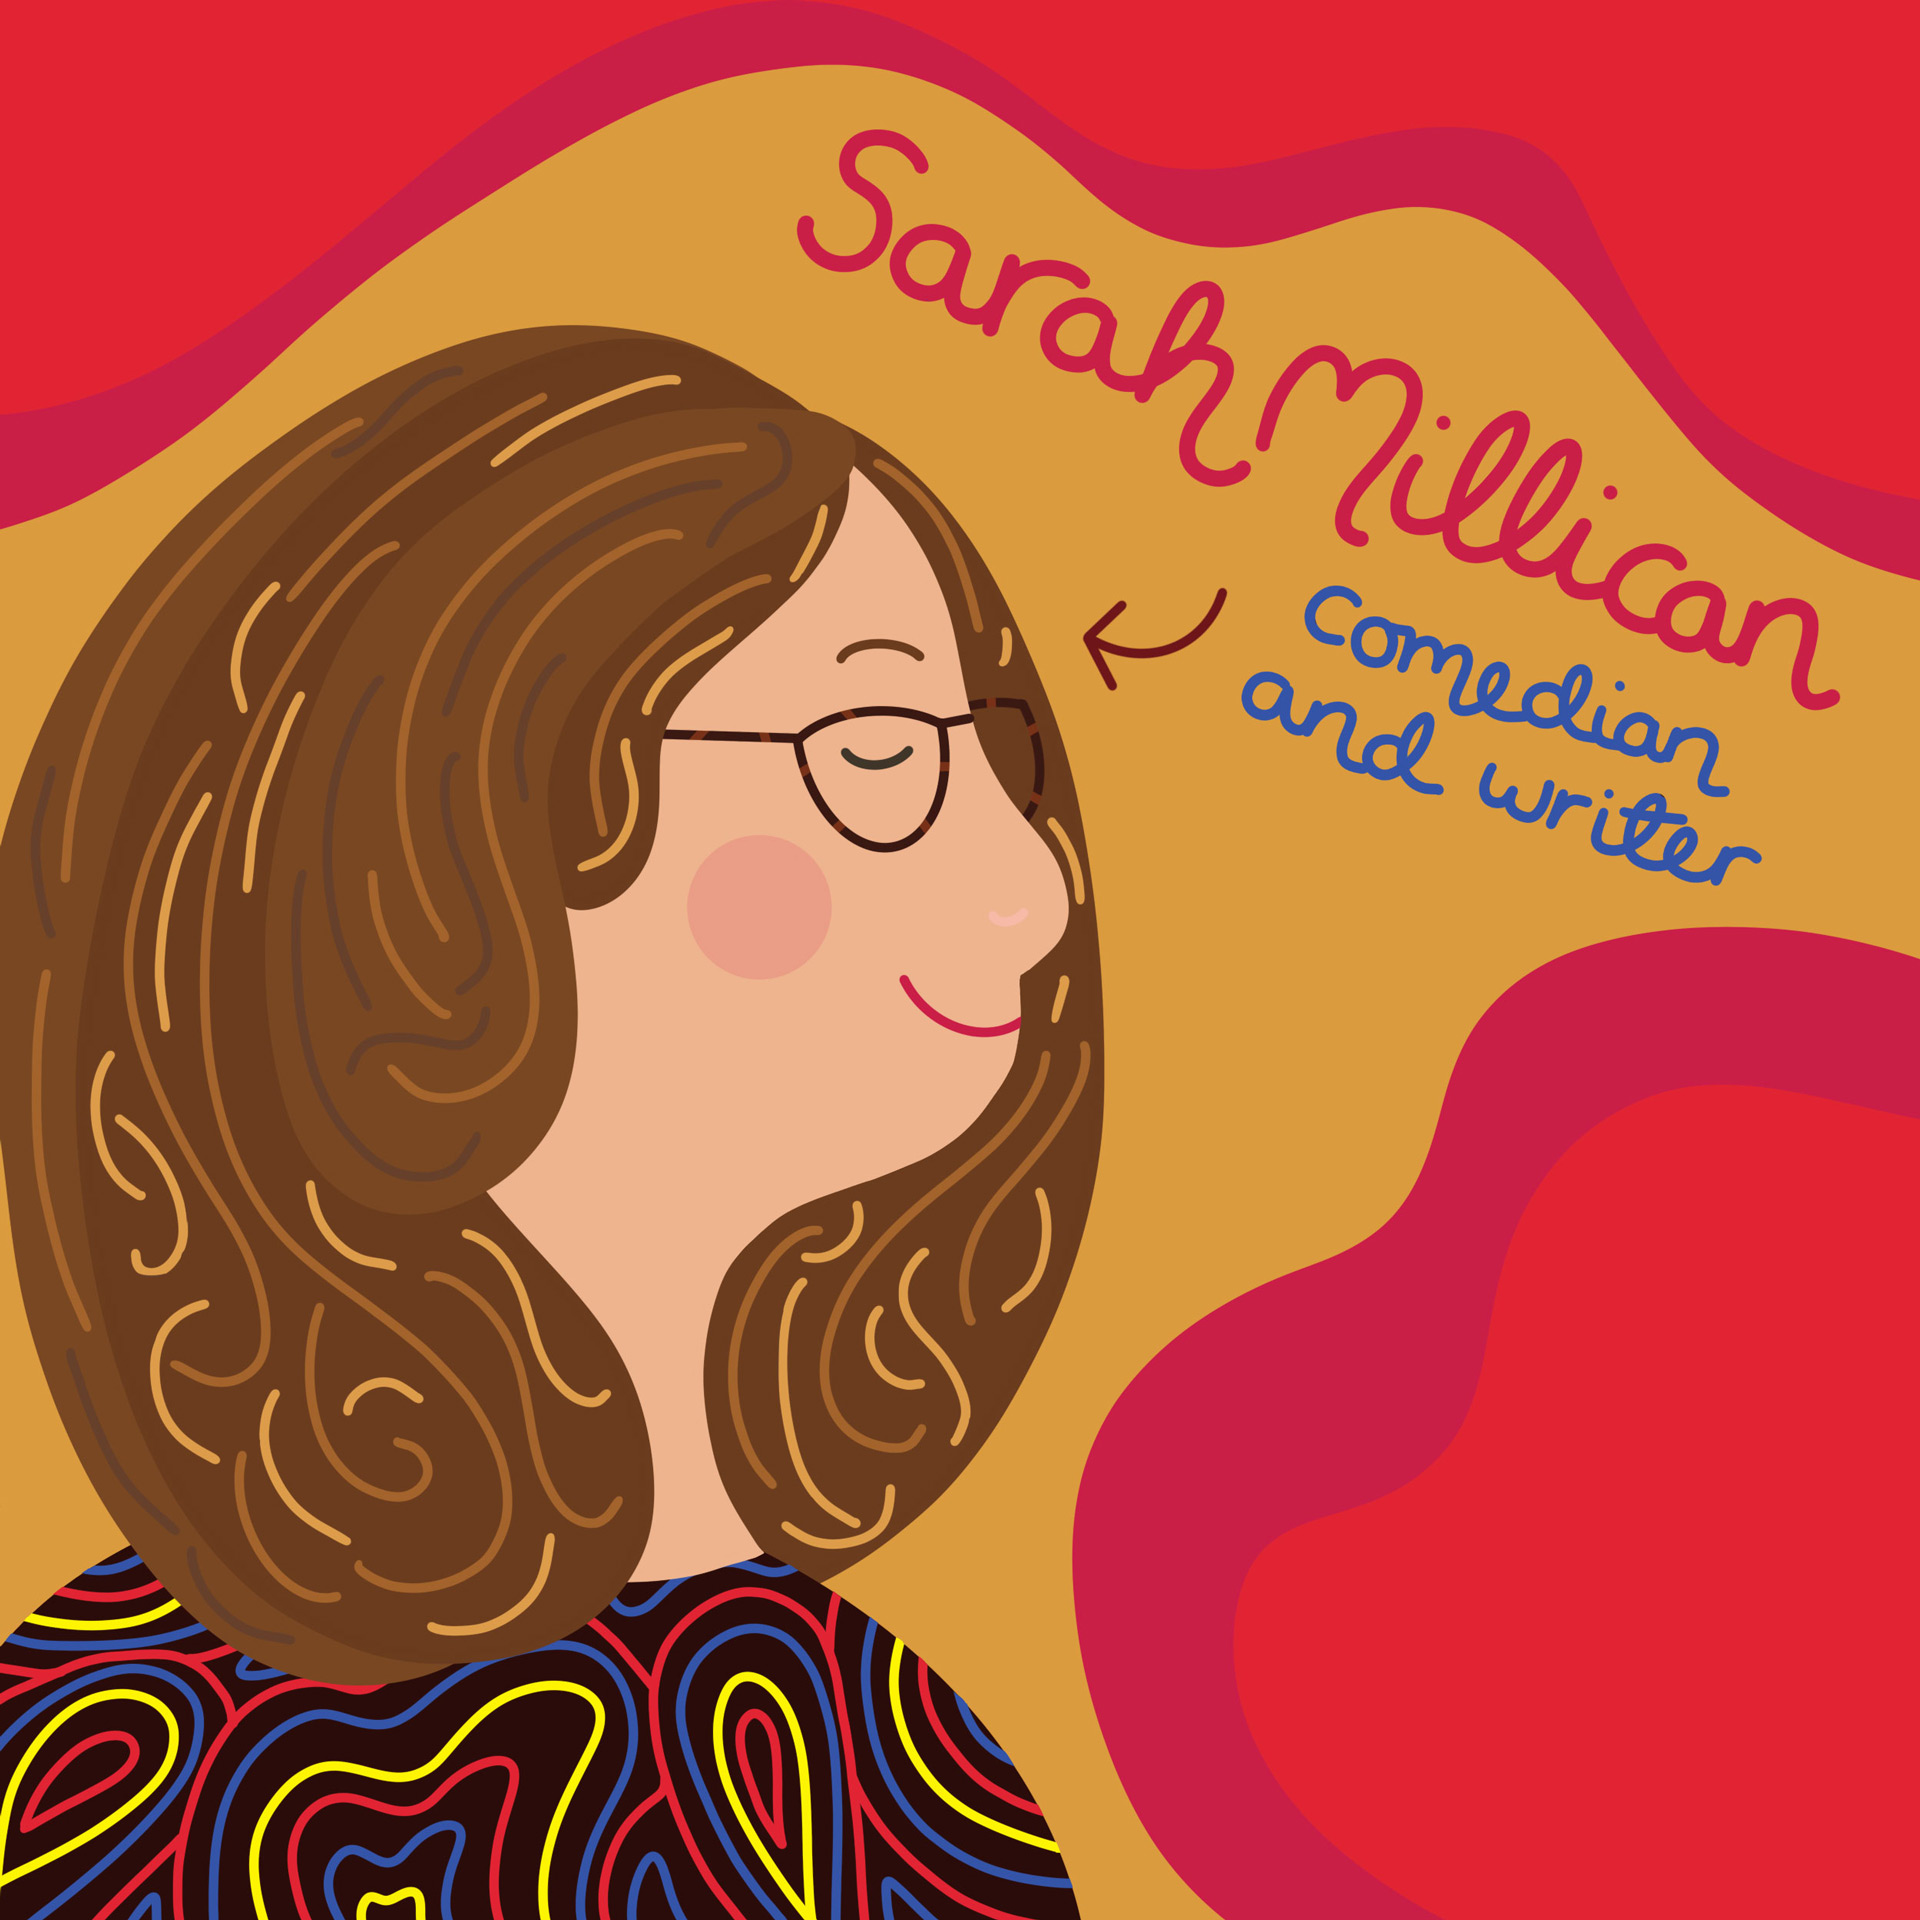 A side-profile portrait of Sarah Millican illustrated in a whimsical and playful illustration style. Sarah is depicted at the left of the square image, against a wavy background of red, pink, and mustard colours. A hand-drawn caption accompanies the portrait, stating 'Sarah Millican: Comedian and Actor'. 